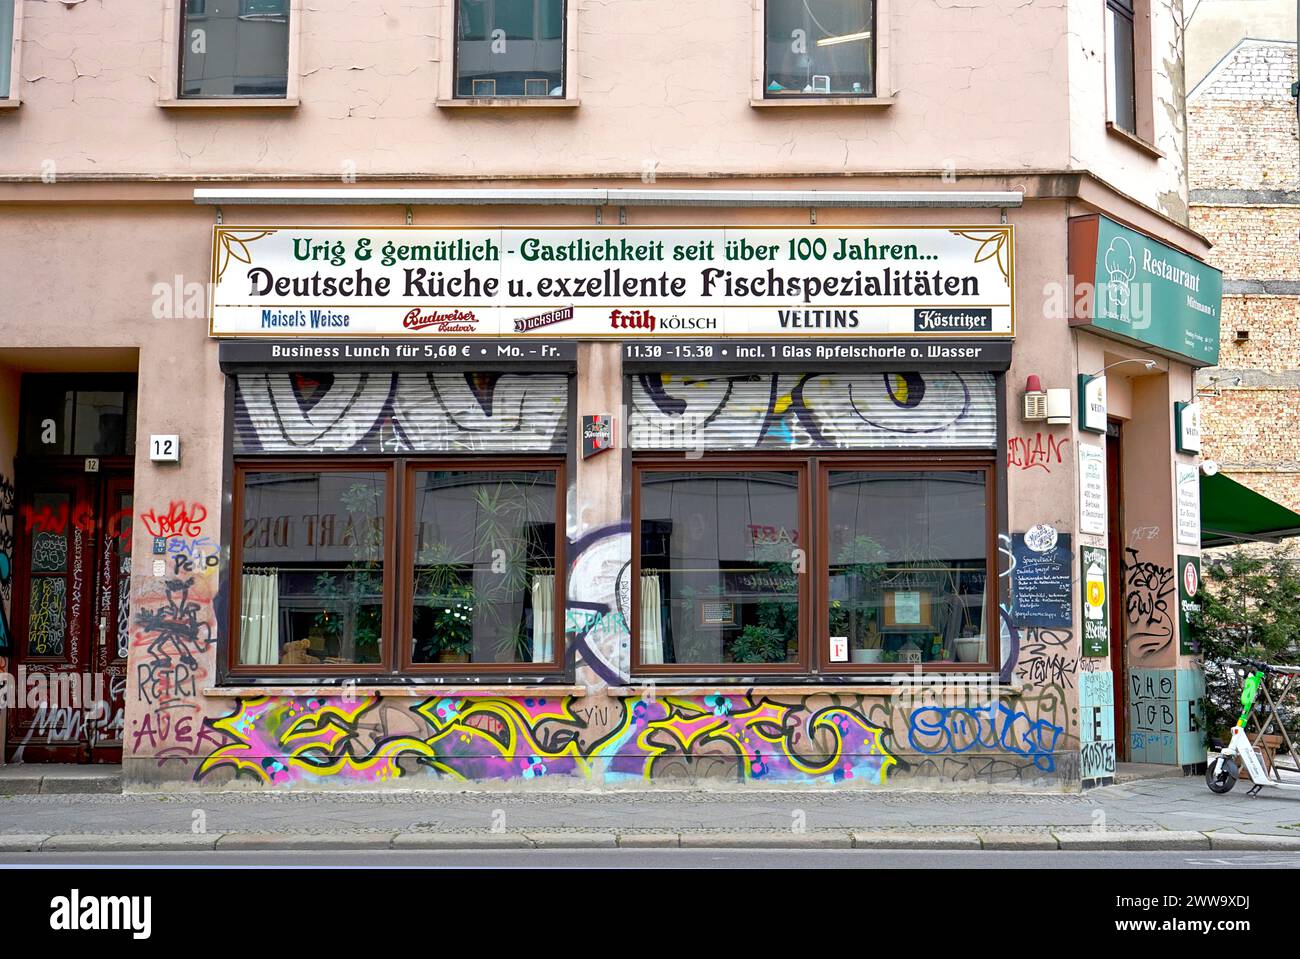 A restaurant in Berlin city center in an old building with big windows and graffiti boasting 100 years of hospitality, Berlin, Germany Stock Photo